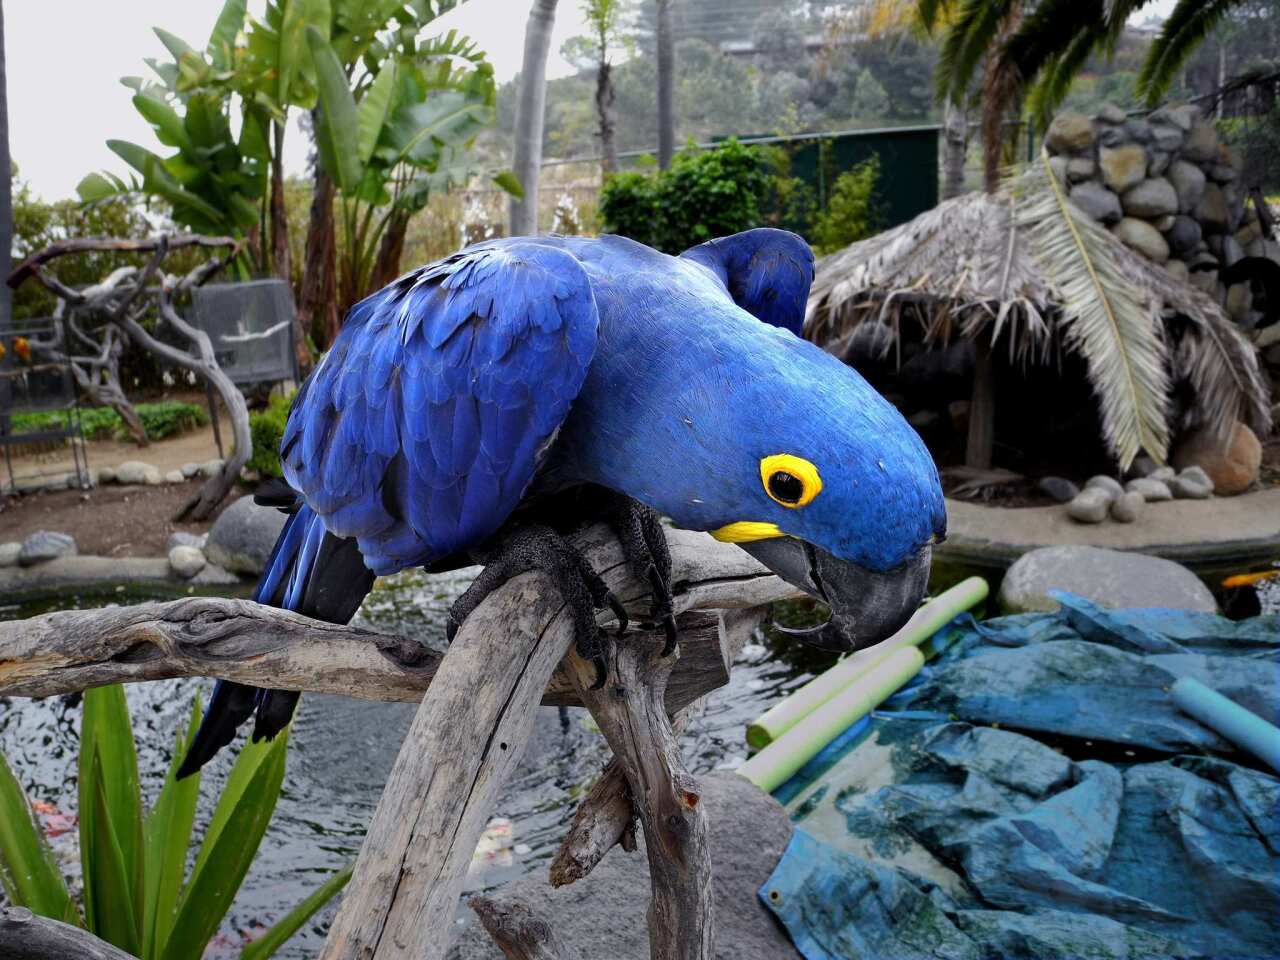 Abby, a hyacinth macaw, is one of the colorful creatures at Free Flight, an exotic bird sanctuary near the Del Mar race track.